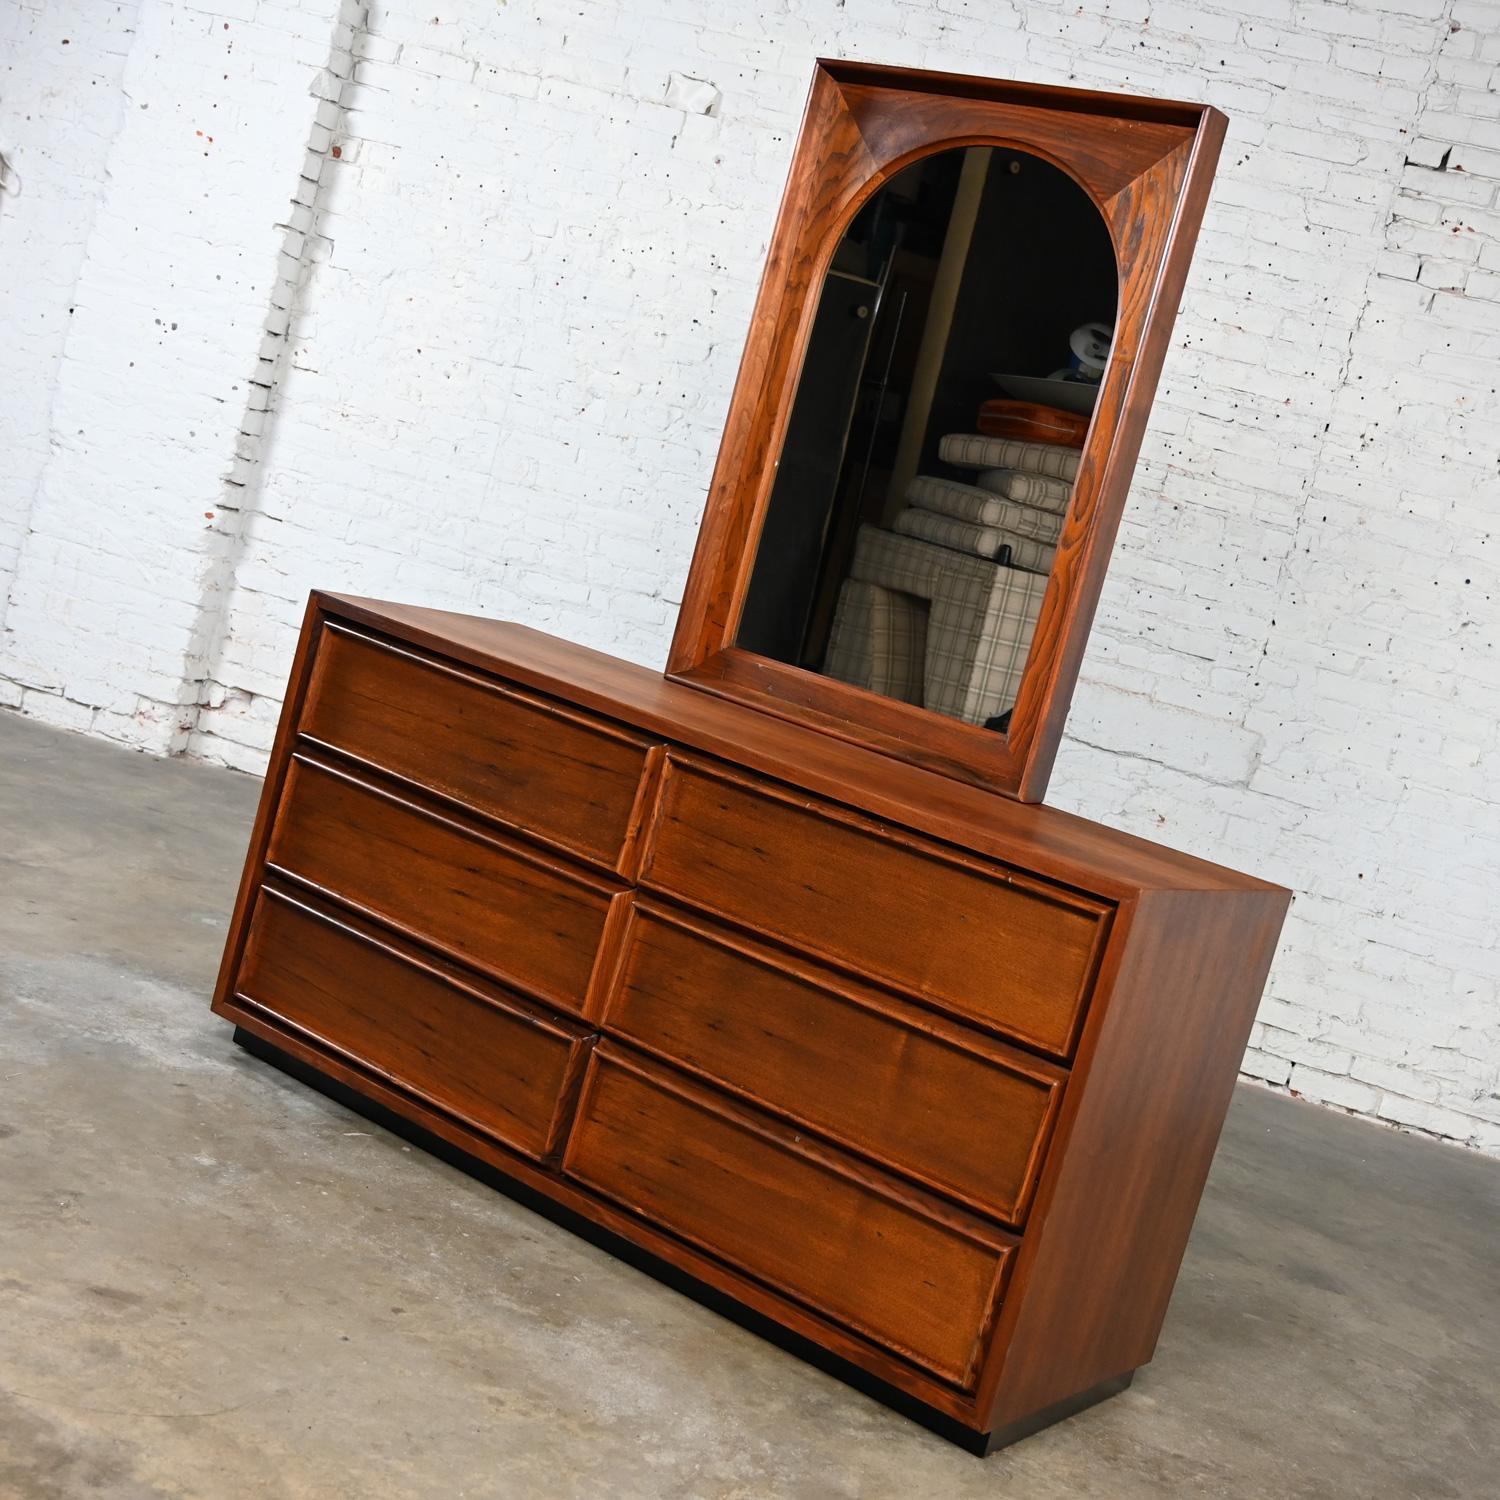 Fabulous vintage Mid Century Modern 6 drawer dresser with framed arch mirror by Dillingham Manufacturing Company. Comprised of a walnut case rustic pecky cypress drawers, and a recessed black painted plinth/floating base. Beautiful condition,